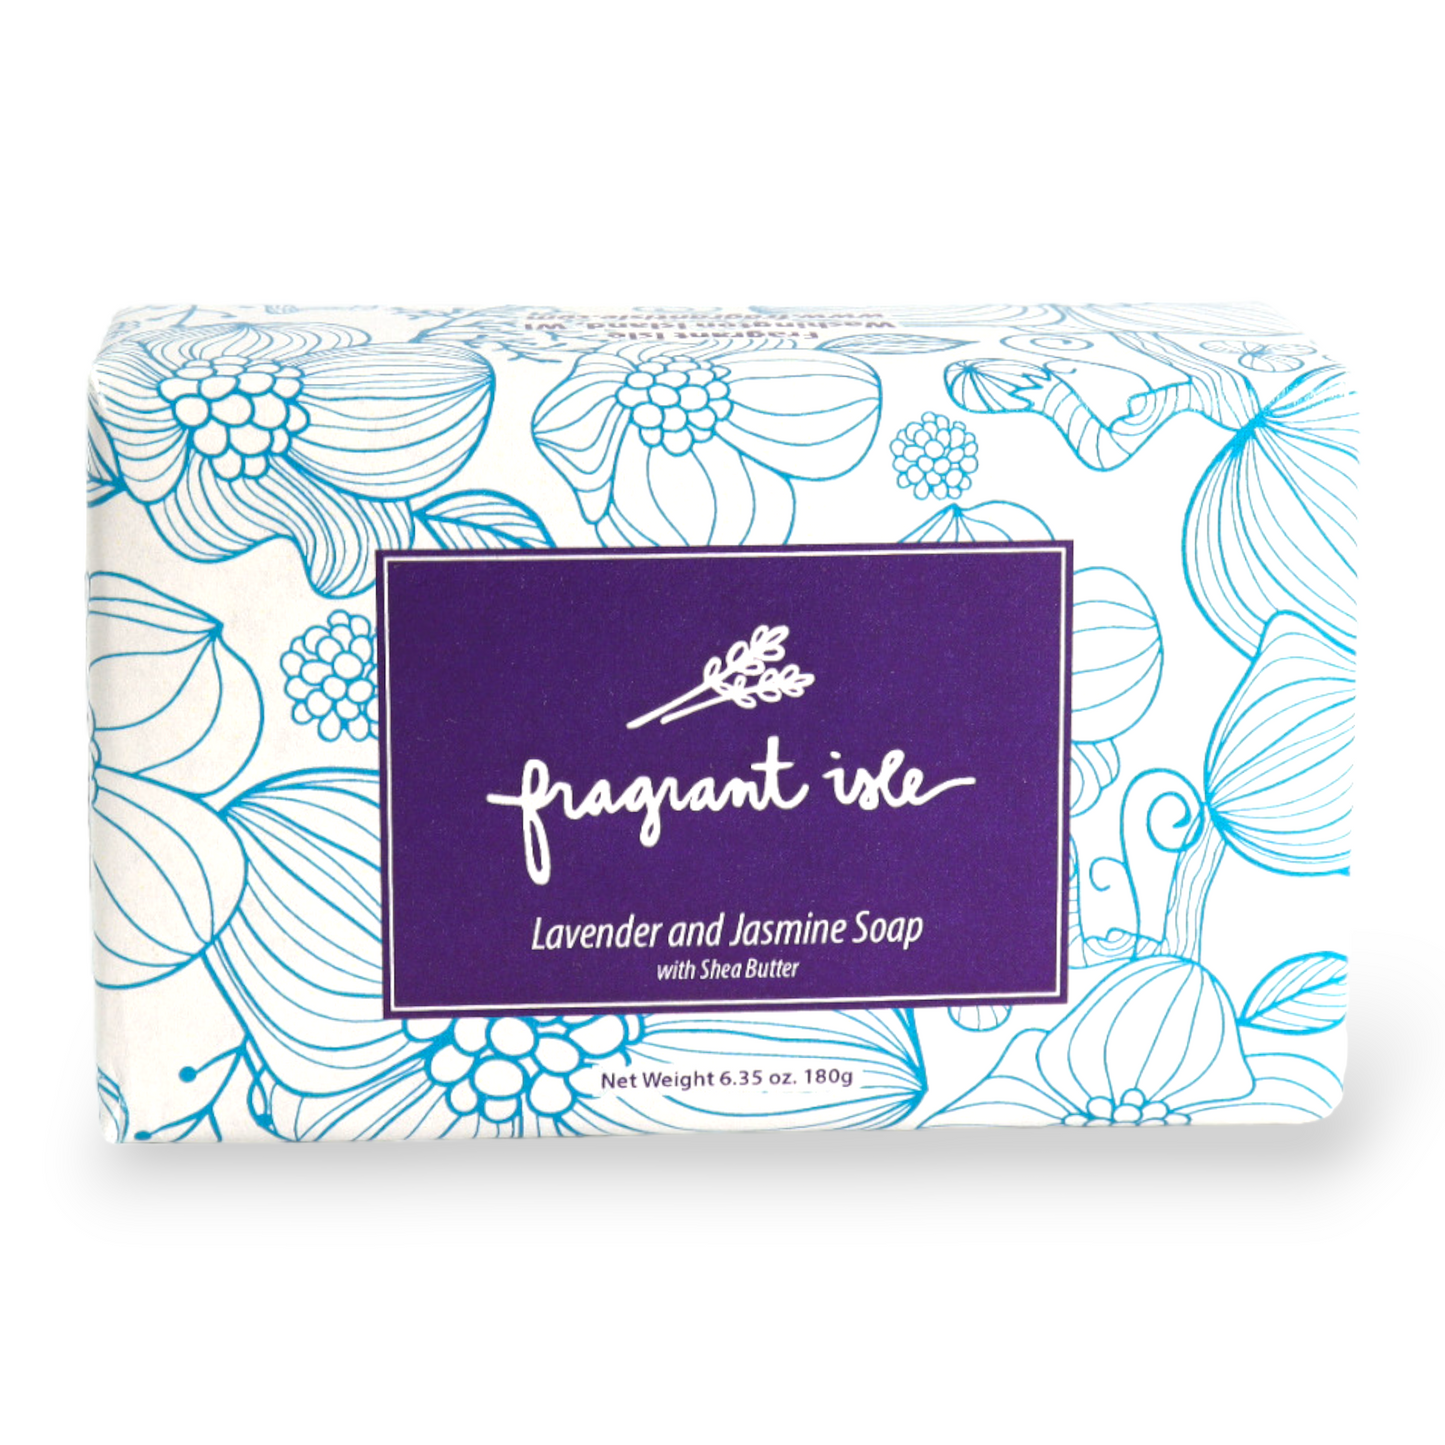 Lavender and Jasmine Soap with Shea Butter - 6.35 oz